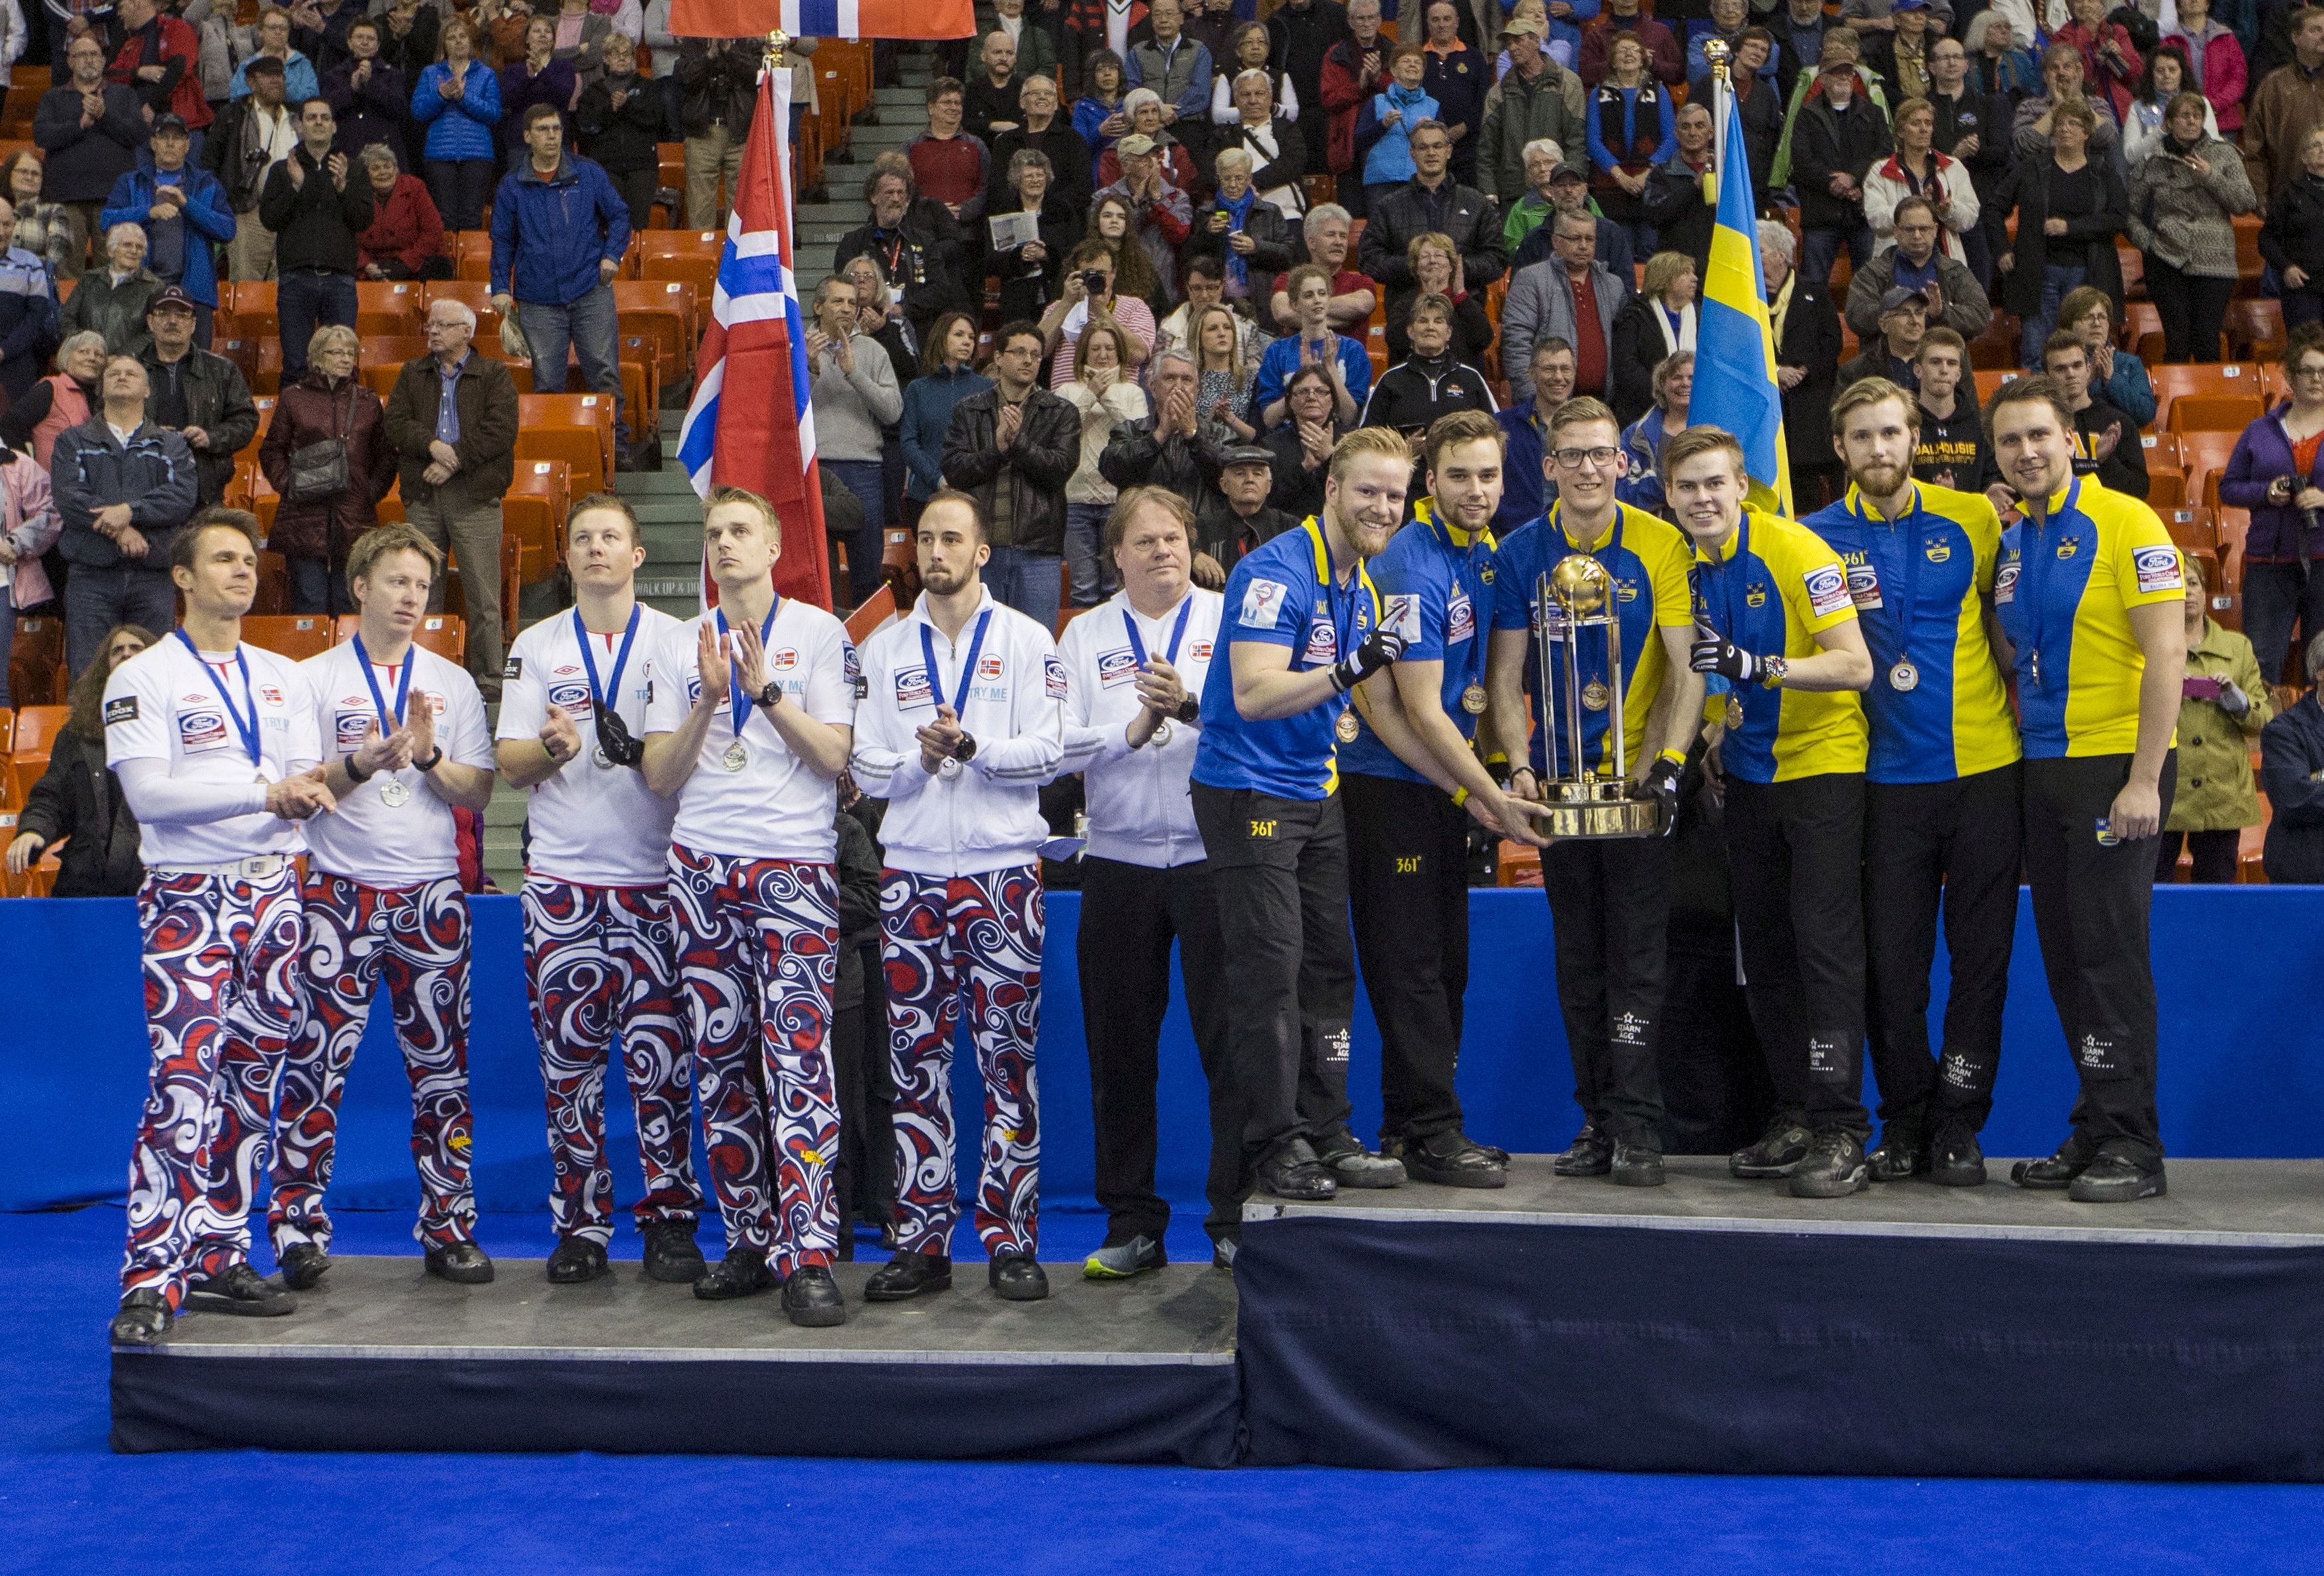 FILE PHOTO: ON THIS DAY -- April 5  April 5, 2015     CURLING - Sweden celebrate with the trophy after defeating Norway 9-5 in the gold medal match at the World Curling Championships in Halifax, Nova Scotia.     Sweden skip Niklas Edin helped his side score three points in the first, third and seventh ends to secure the victory and avenge their defeat by Norway in the previous year's final.     Edin led Sweden to back-to-back world championship gold medals in 2018 and 2019, as well as a silver medal in the 2018 Winter Olympics in Pyeongchang. REUTERS/Mark Blinch/File Photo